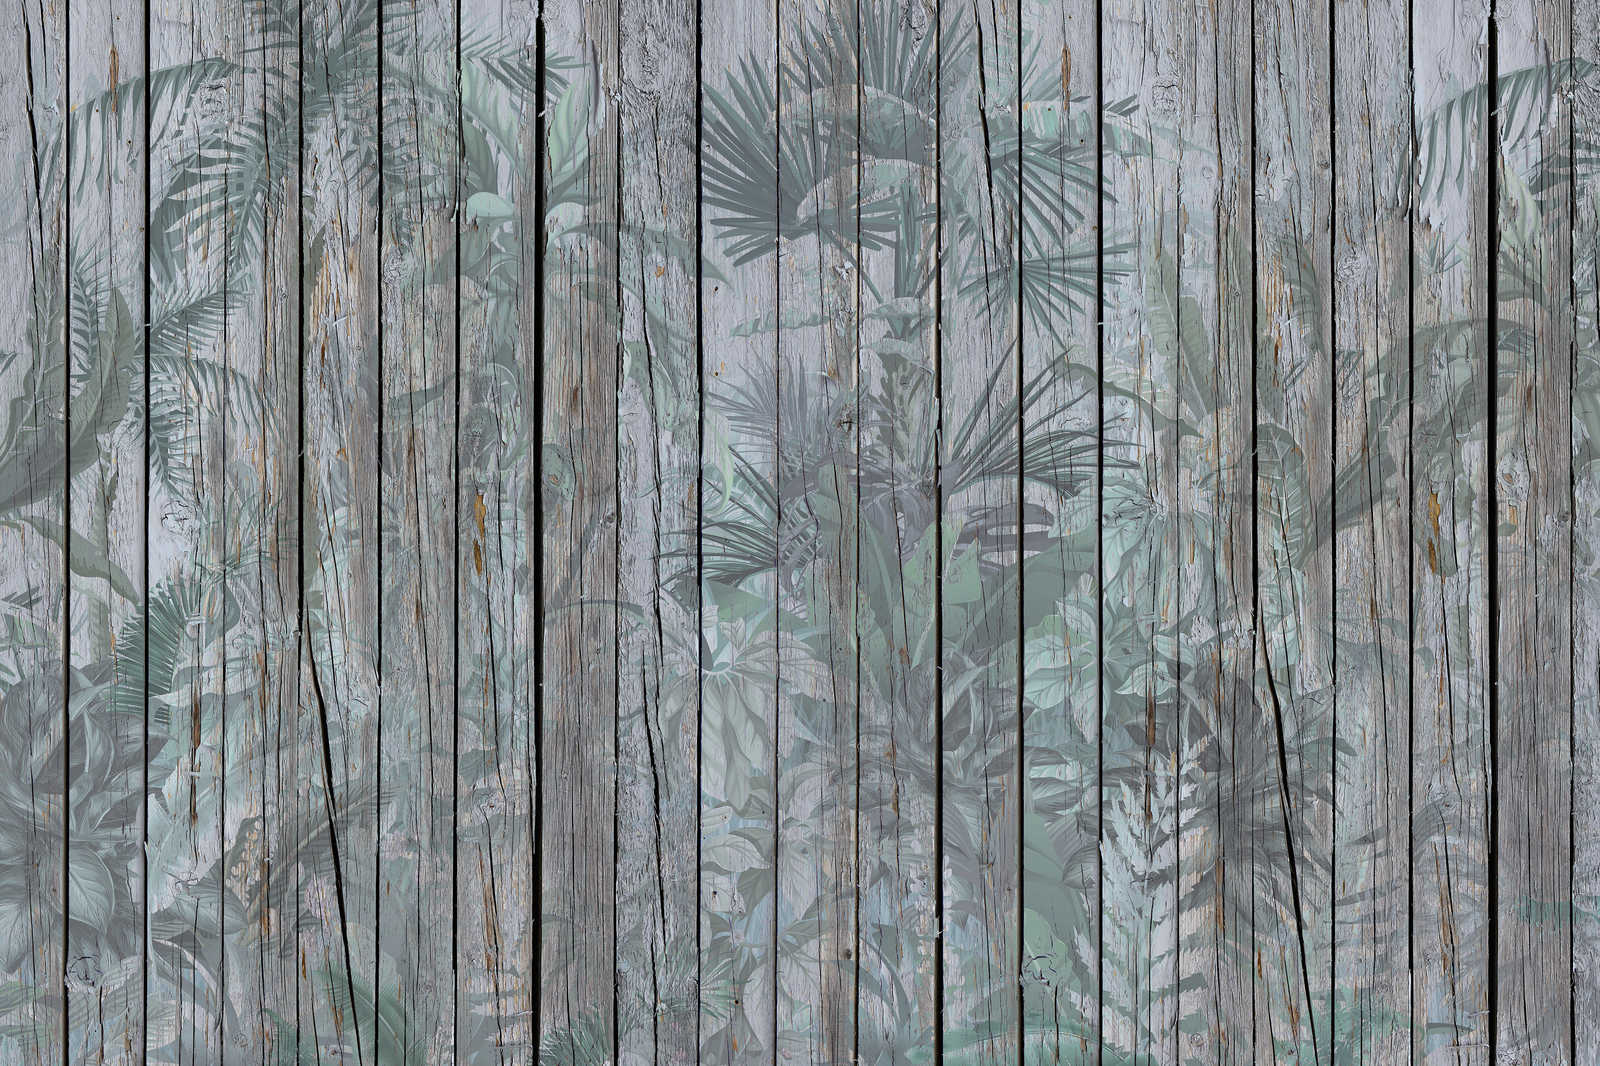             Canvas painting Wooden wall with jungle plants - 0,90 m x 0,60 m
        